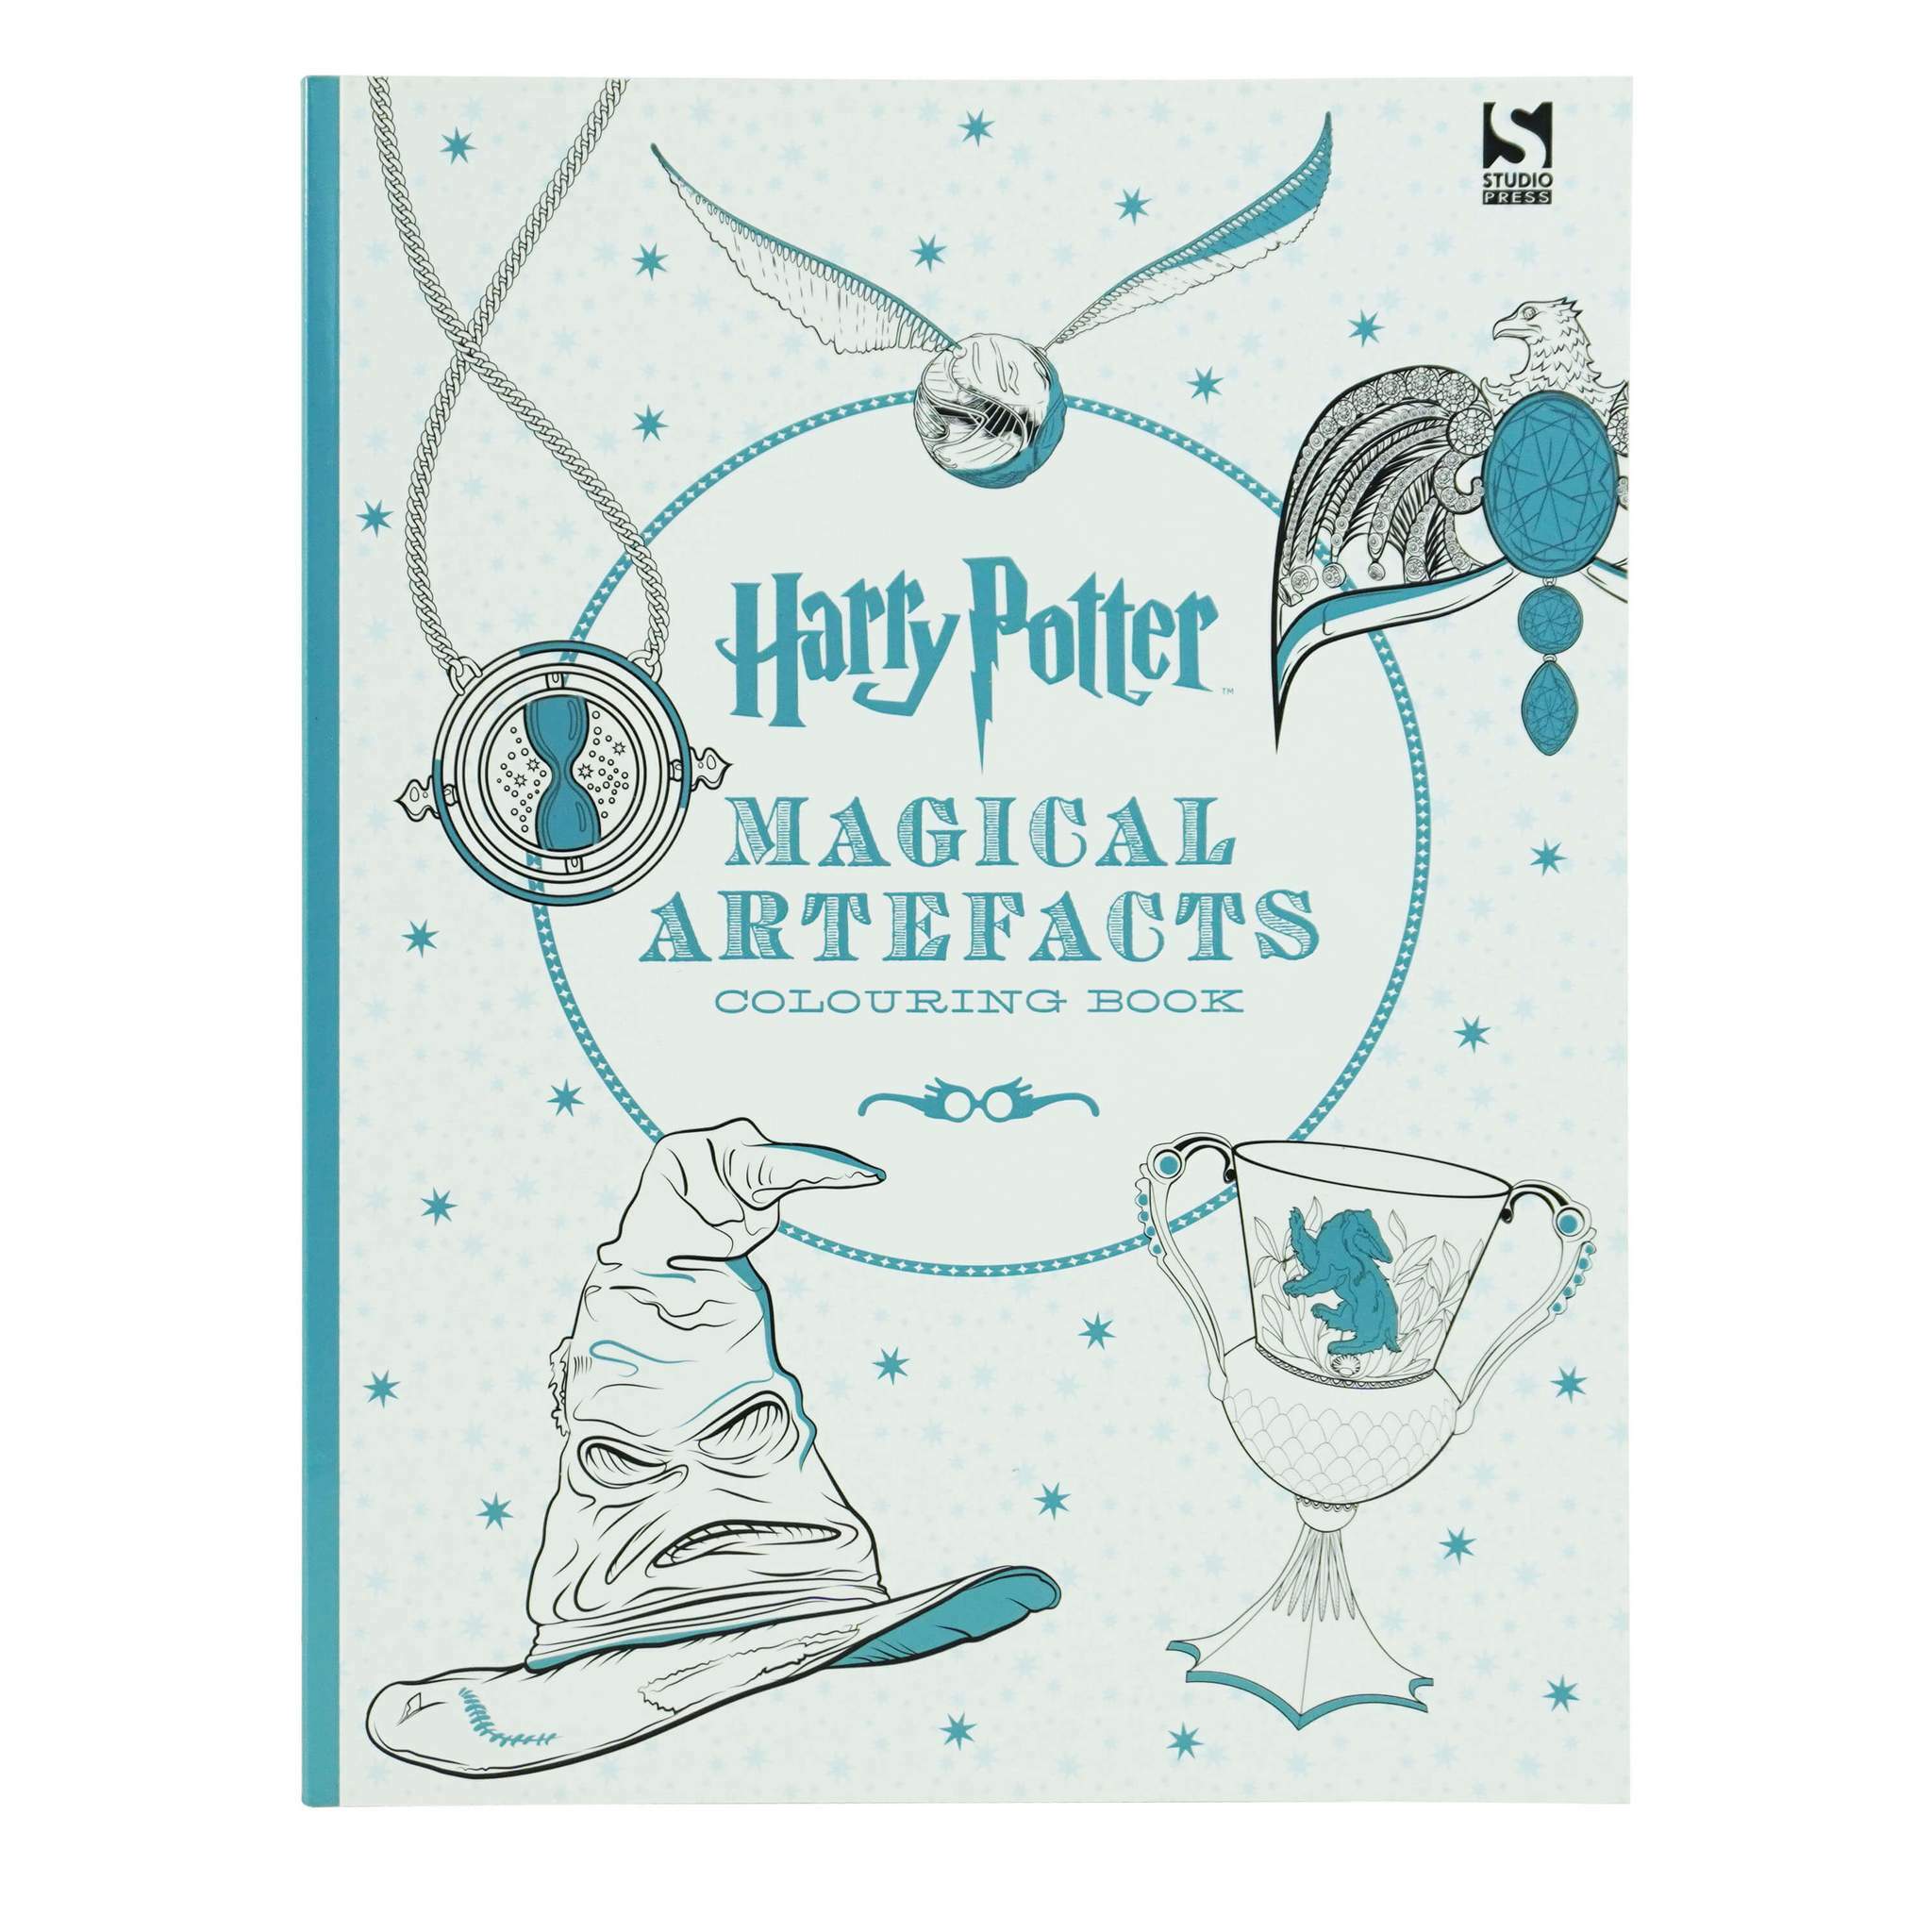 Harry Potter Magical Artefacts Colouring Book 4 (Paperback)